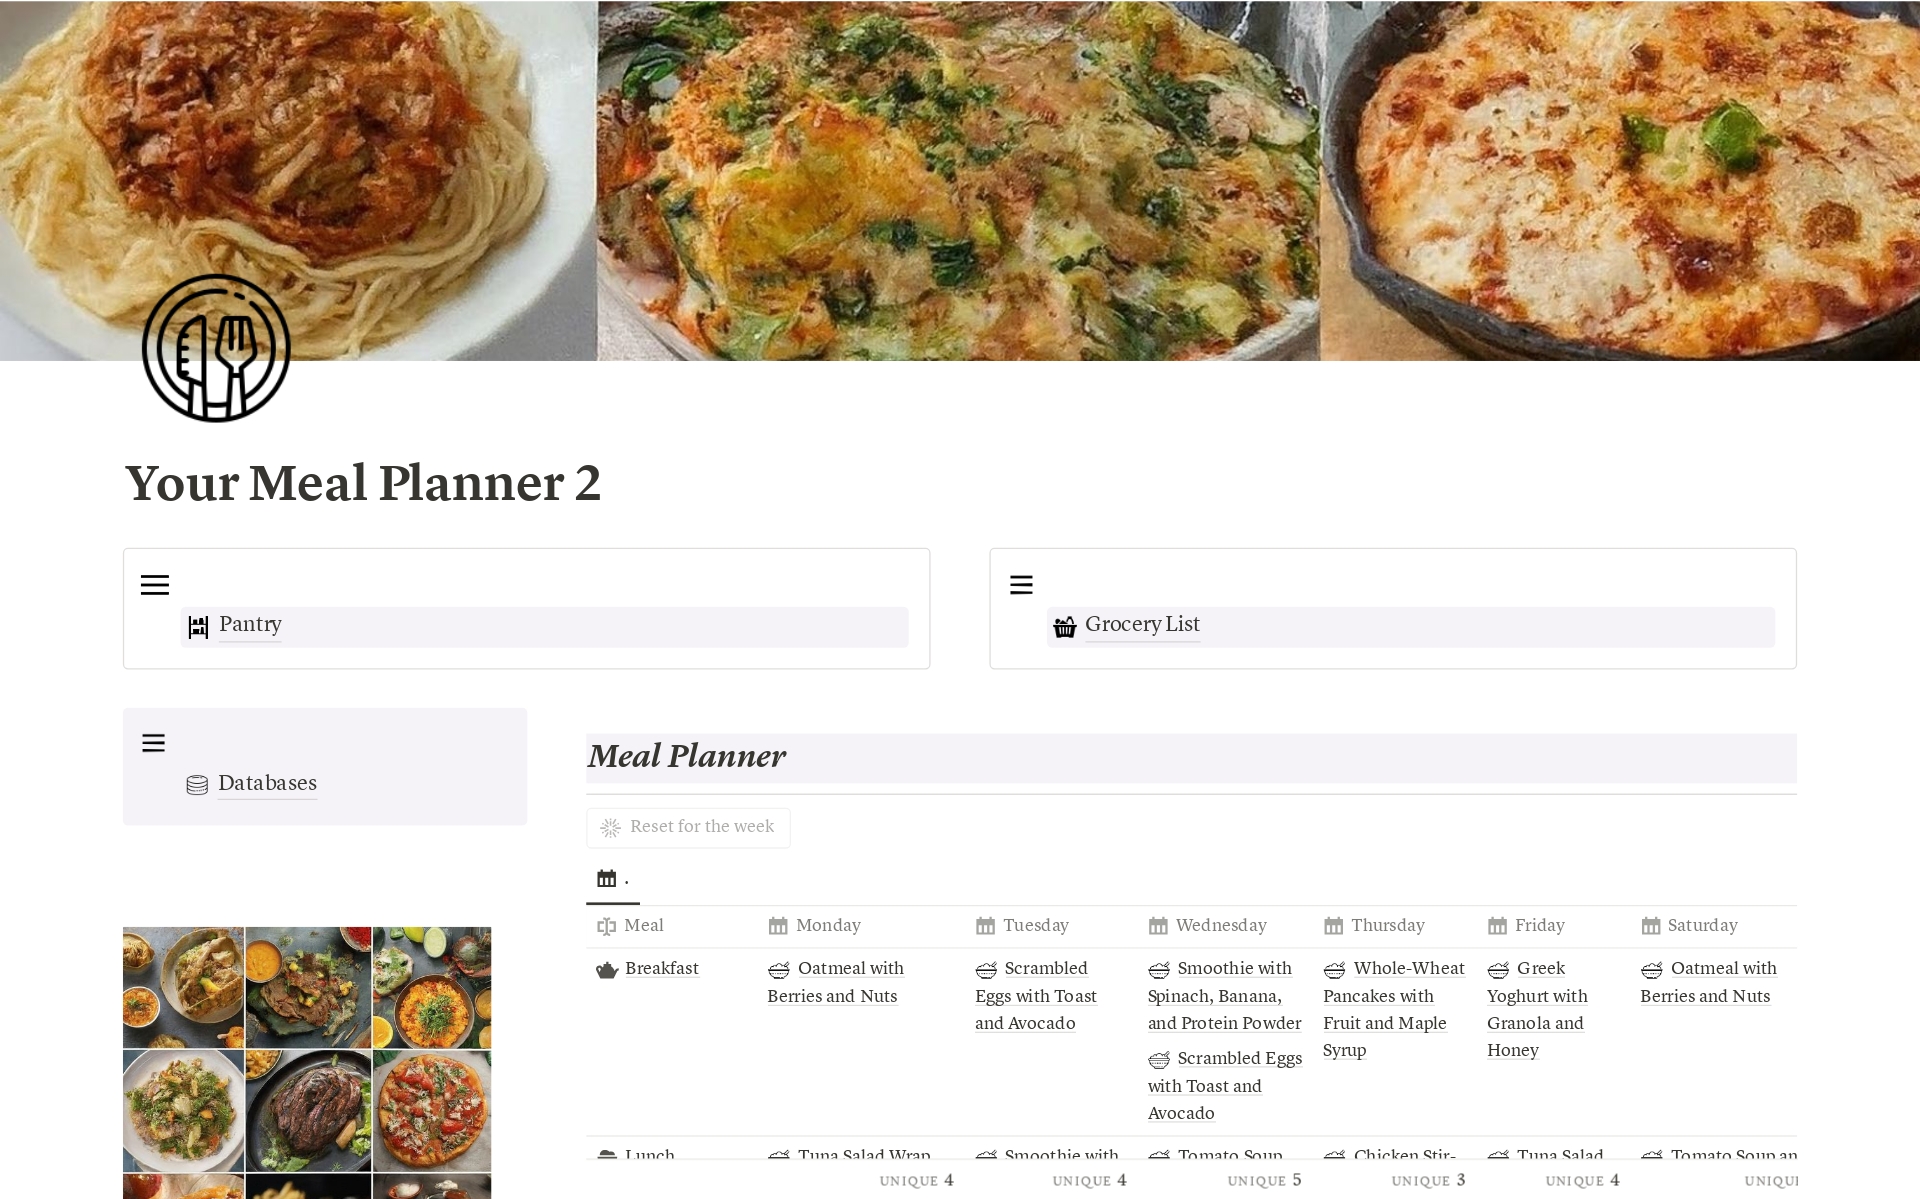 --> Meal Planner
--> Pantry
--> Grocery List
--> Recipes
--> Meal Planner Add-On Feature to Grocery List
--> Meals in Categories: Breakfast, Lunch, Dinner, Dessert
--> Pantry in Categories: Condiments, Dried Goods, Produce etc.
--> Recipe URL Source
--> Filter by Ingredients